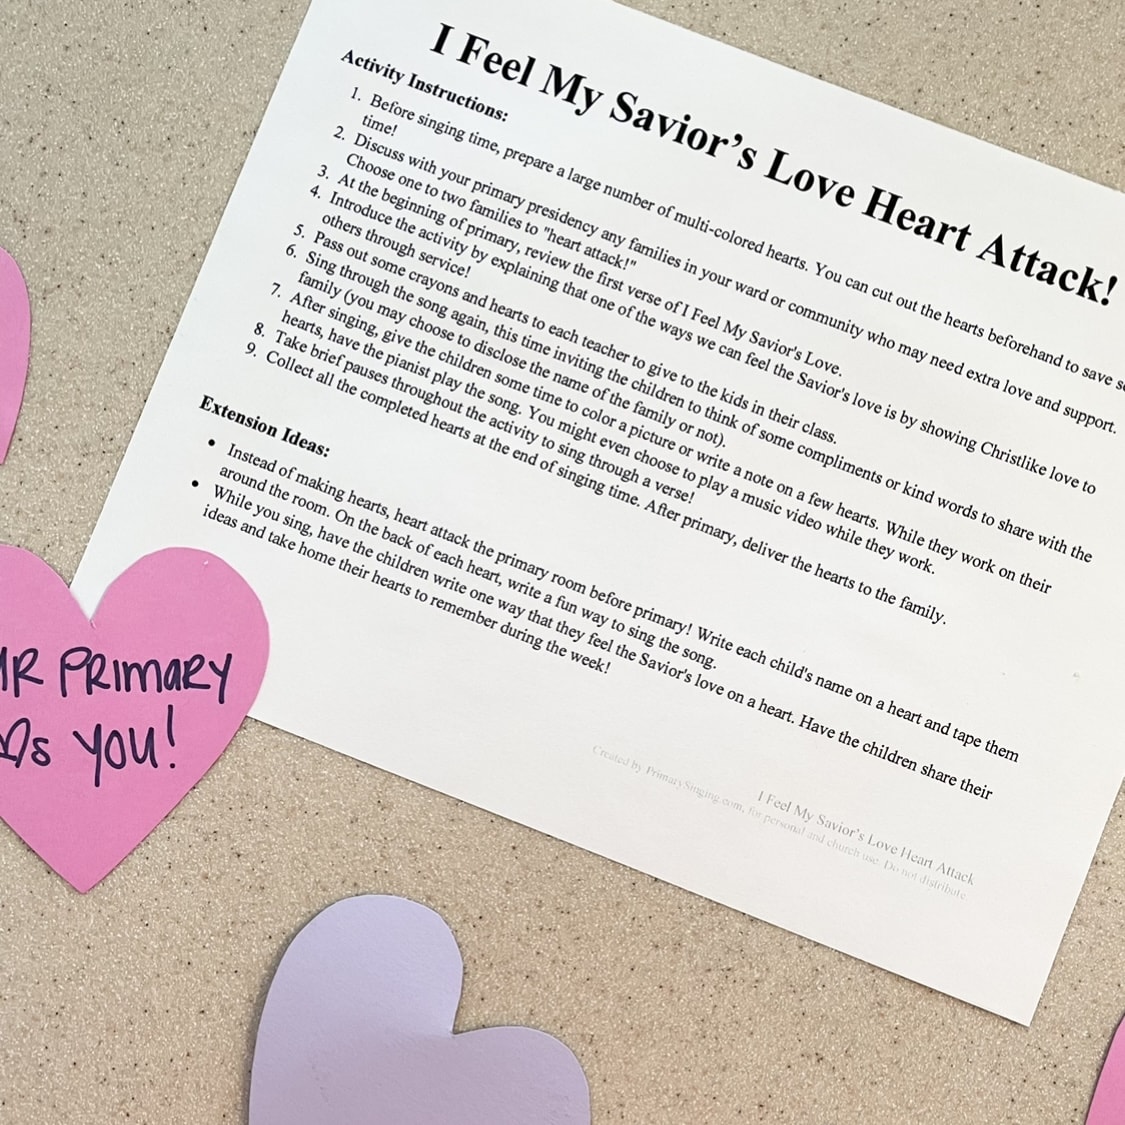 I Feel My Savior's Love Heart Attack Service Activity Easy ideas for Music Leaders IMG 6911